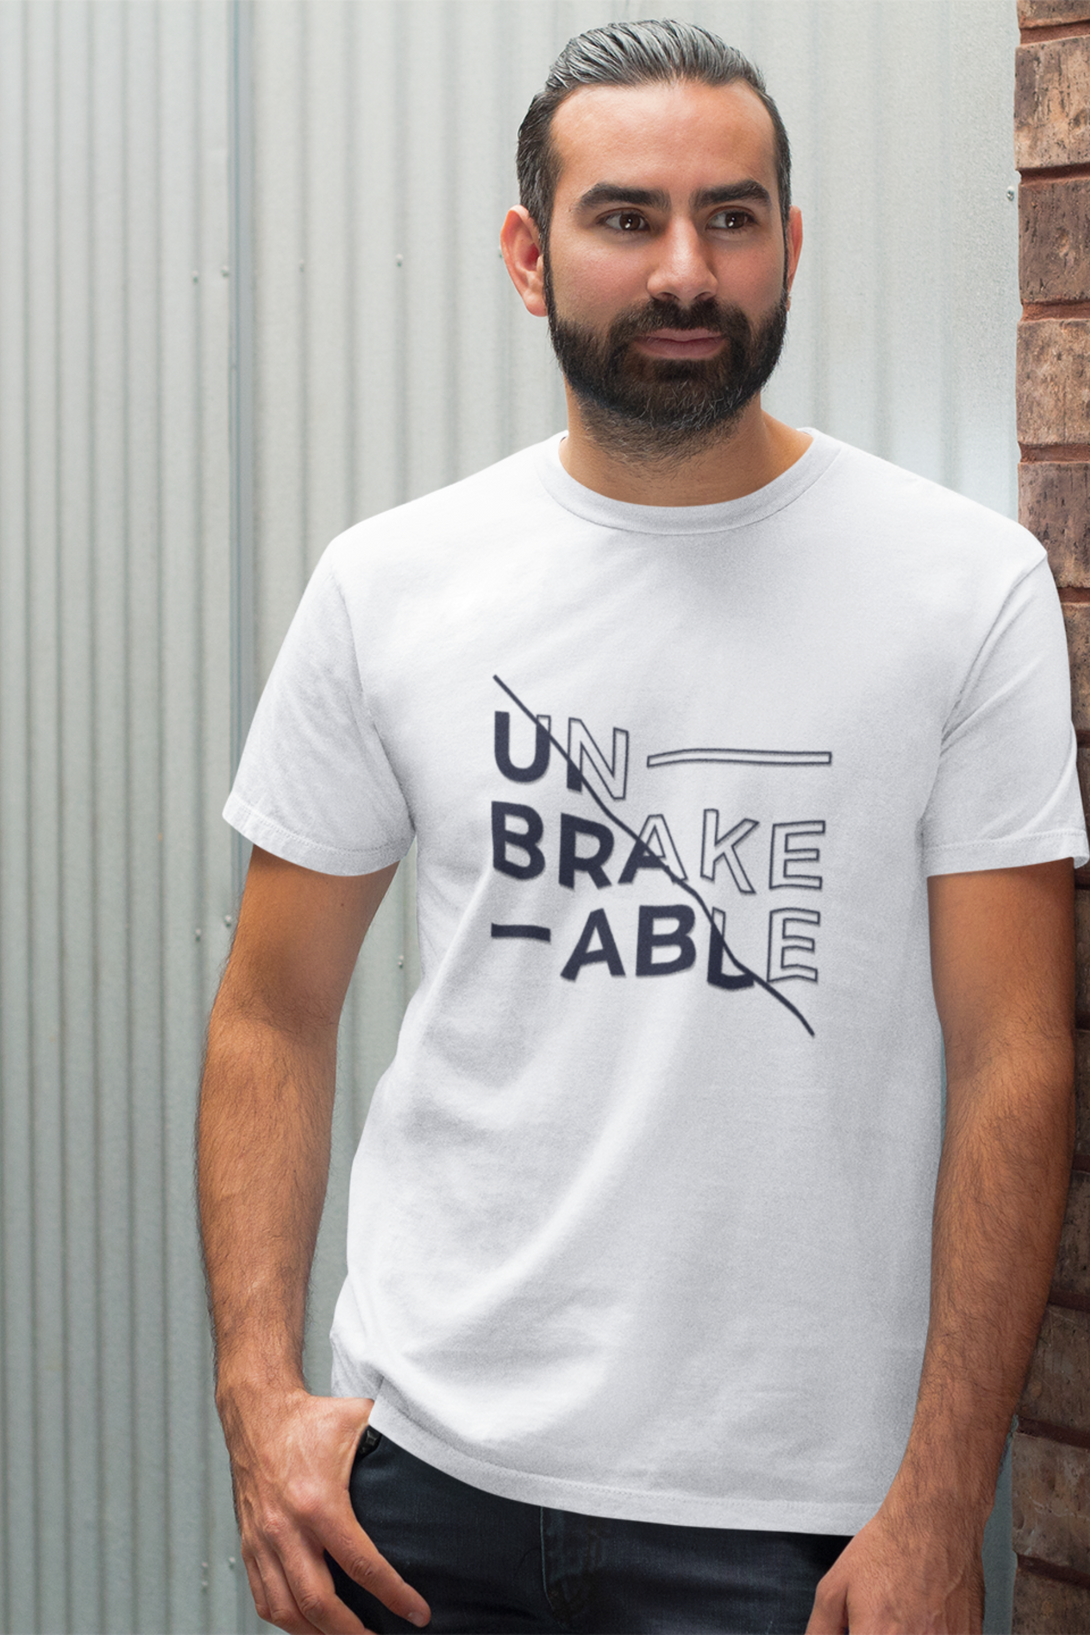 Unbreakable Printed T-Shirt For Men - WowWaves - 3